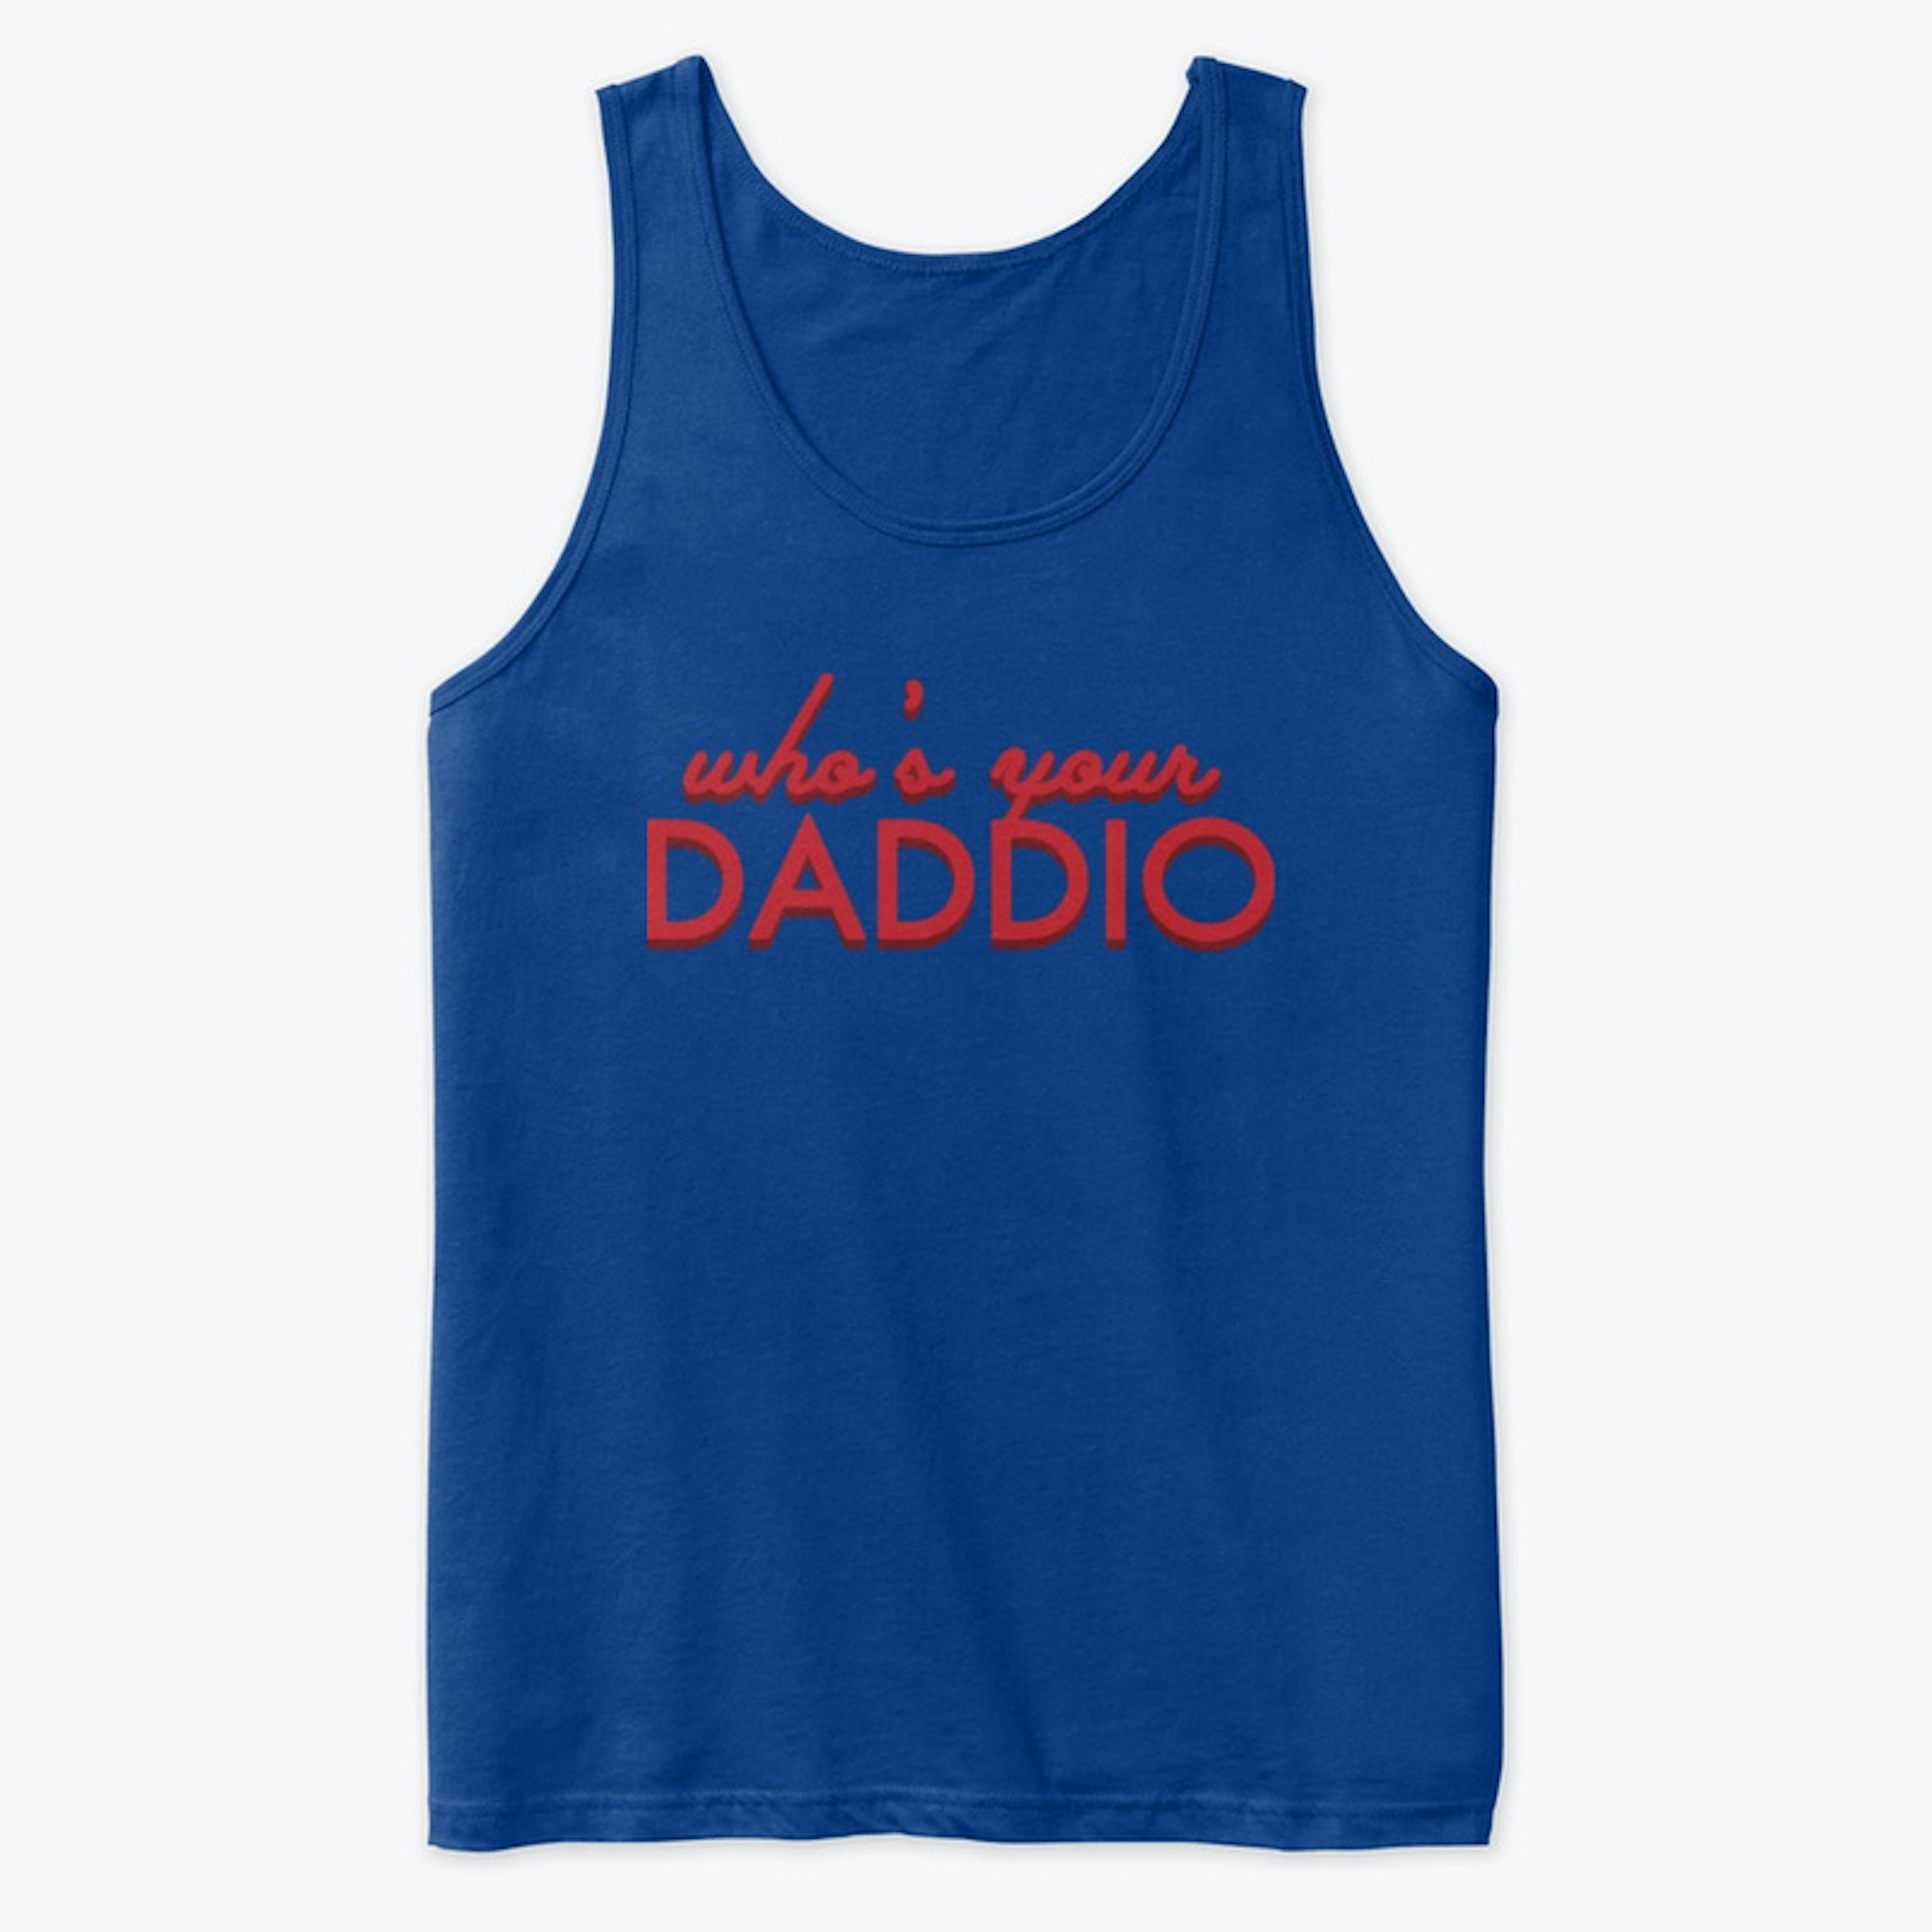 Who's Your Daddio?